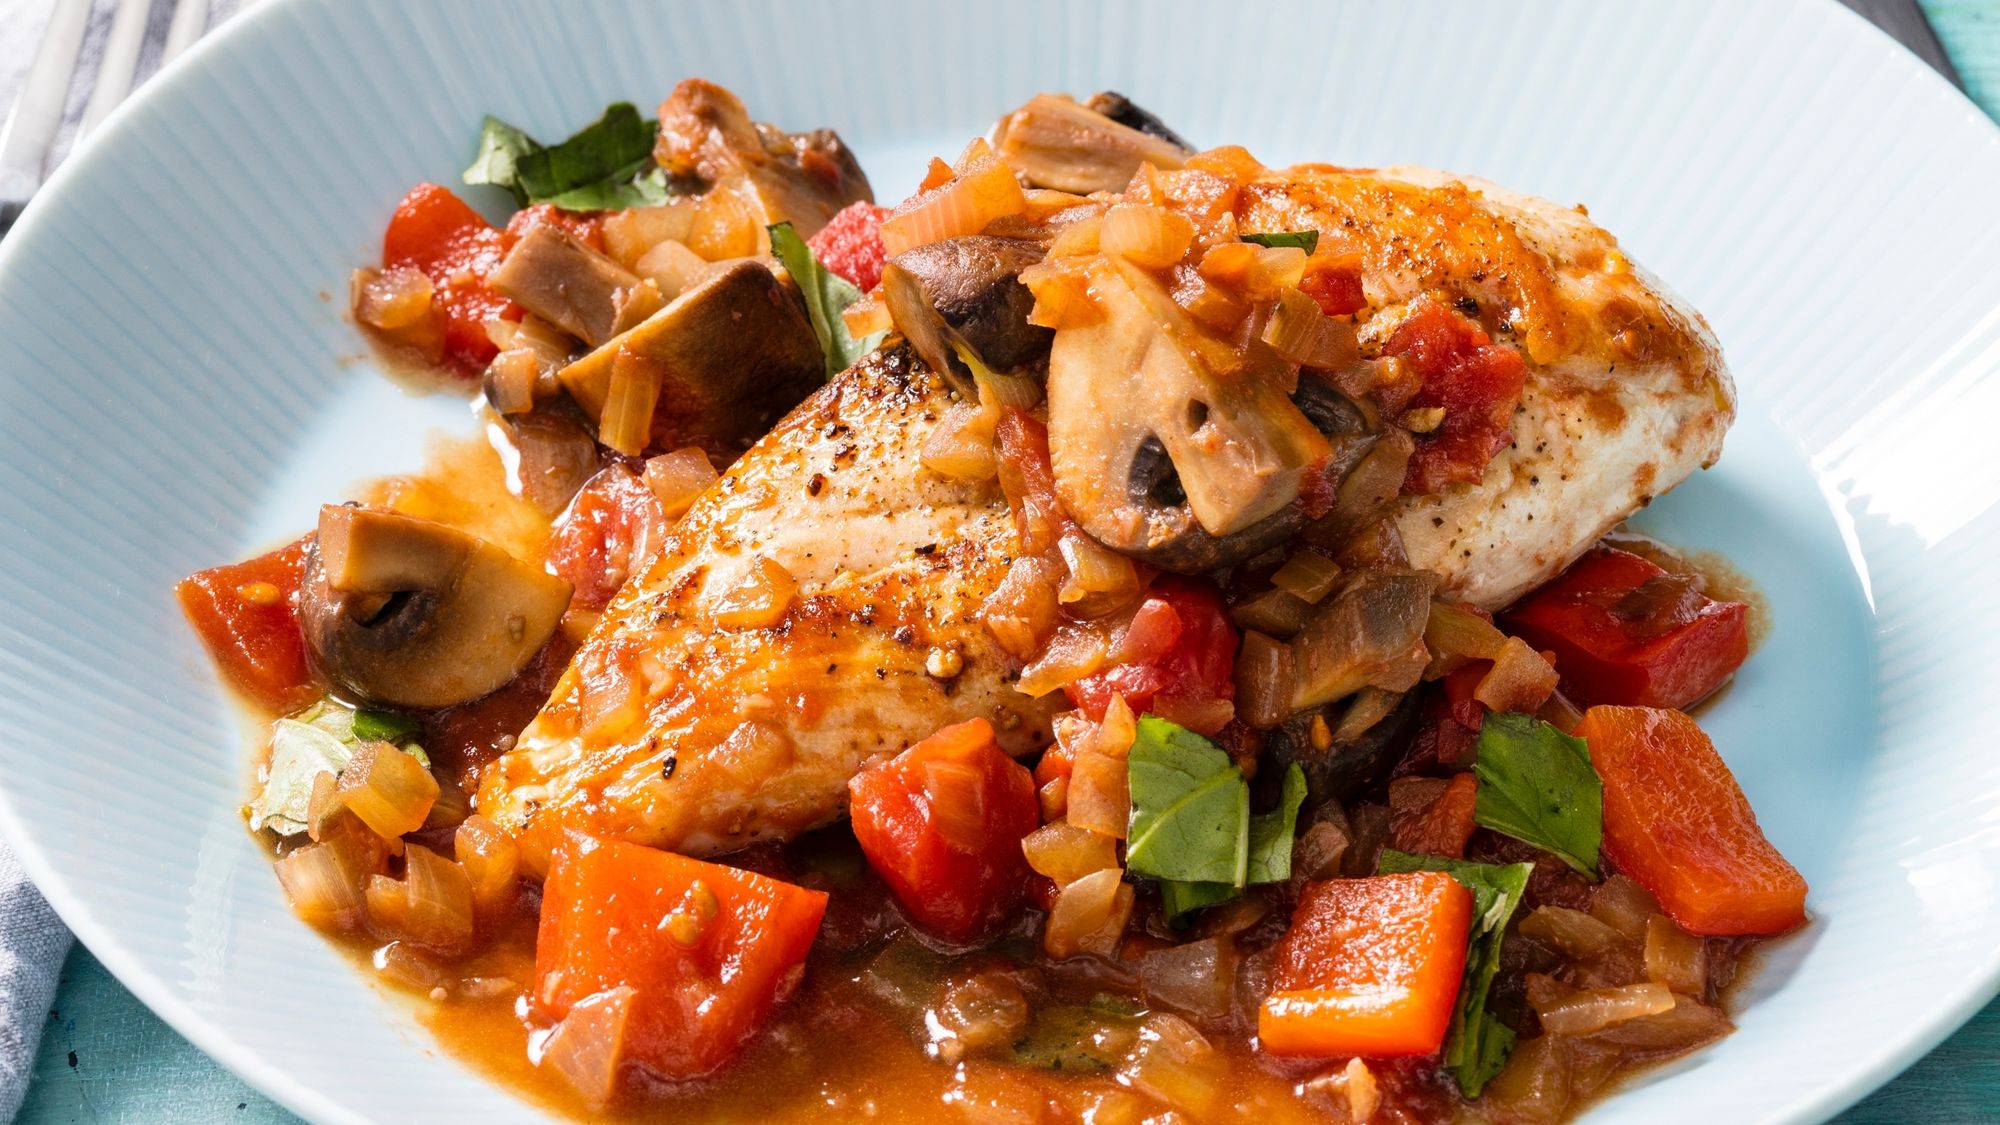 This quick version of chicken cacciatore is ready fast on busy weeknights